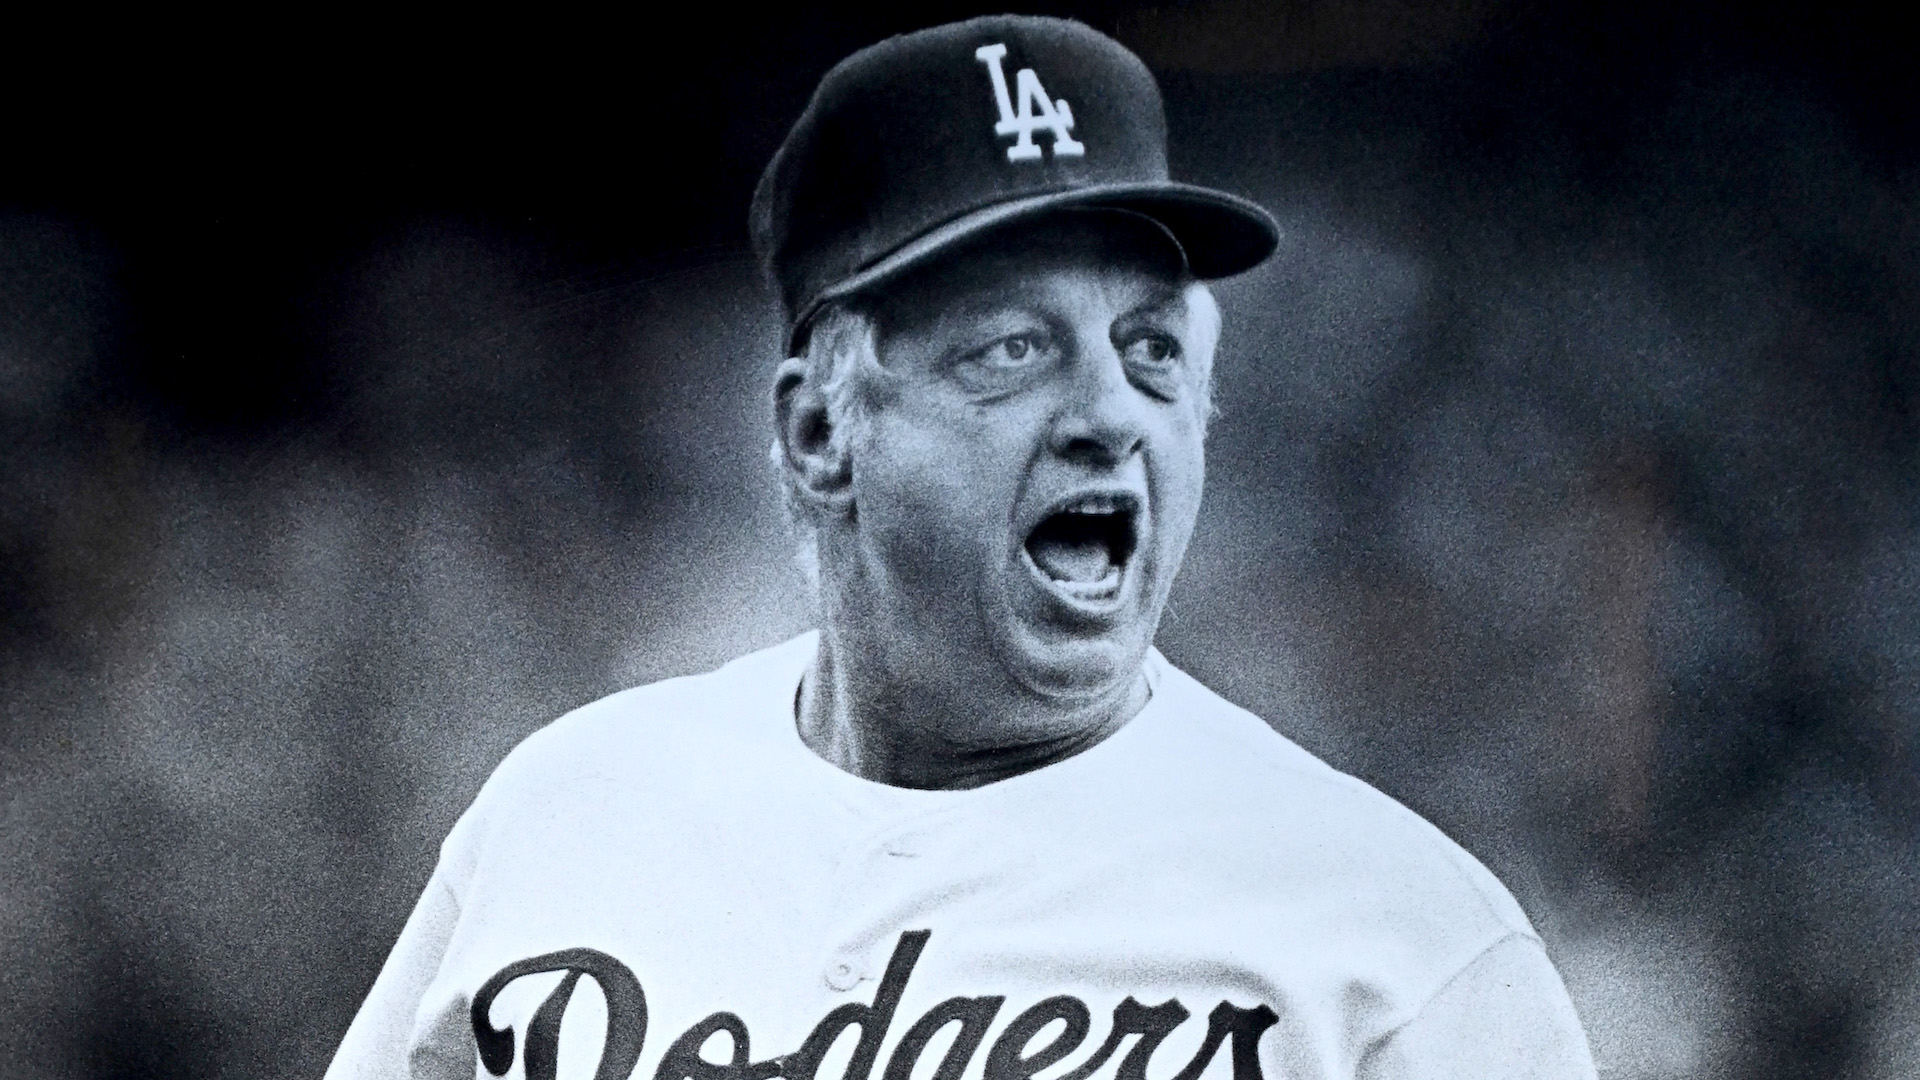 Hall of Fame manager Tommy Lasorda dead at 93 – Action News Jax